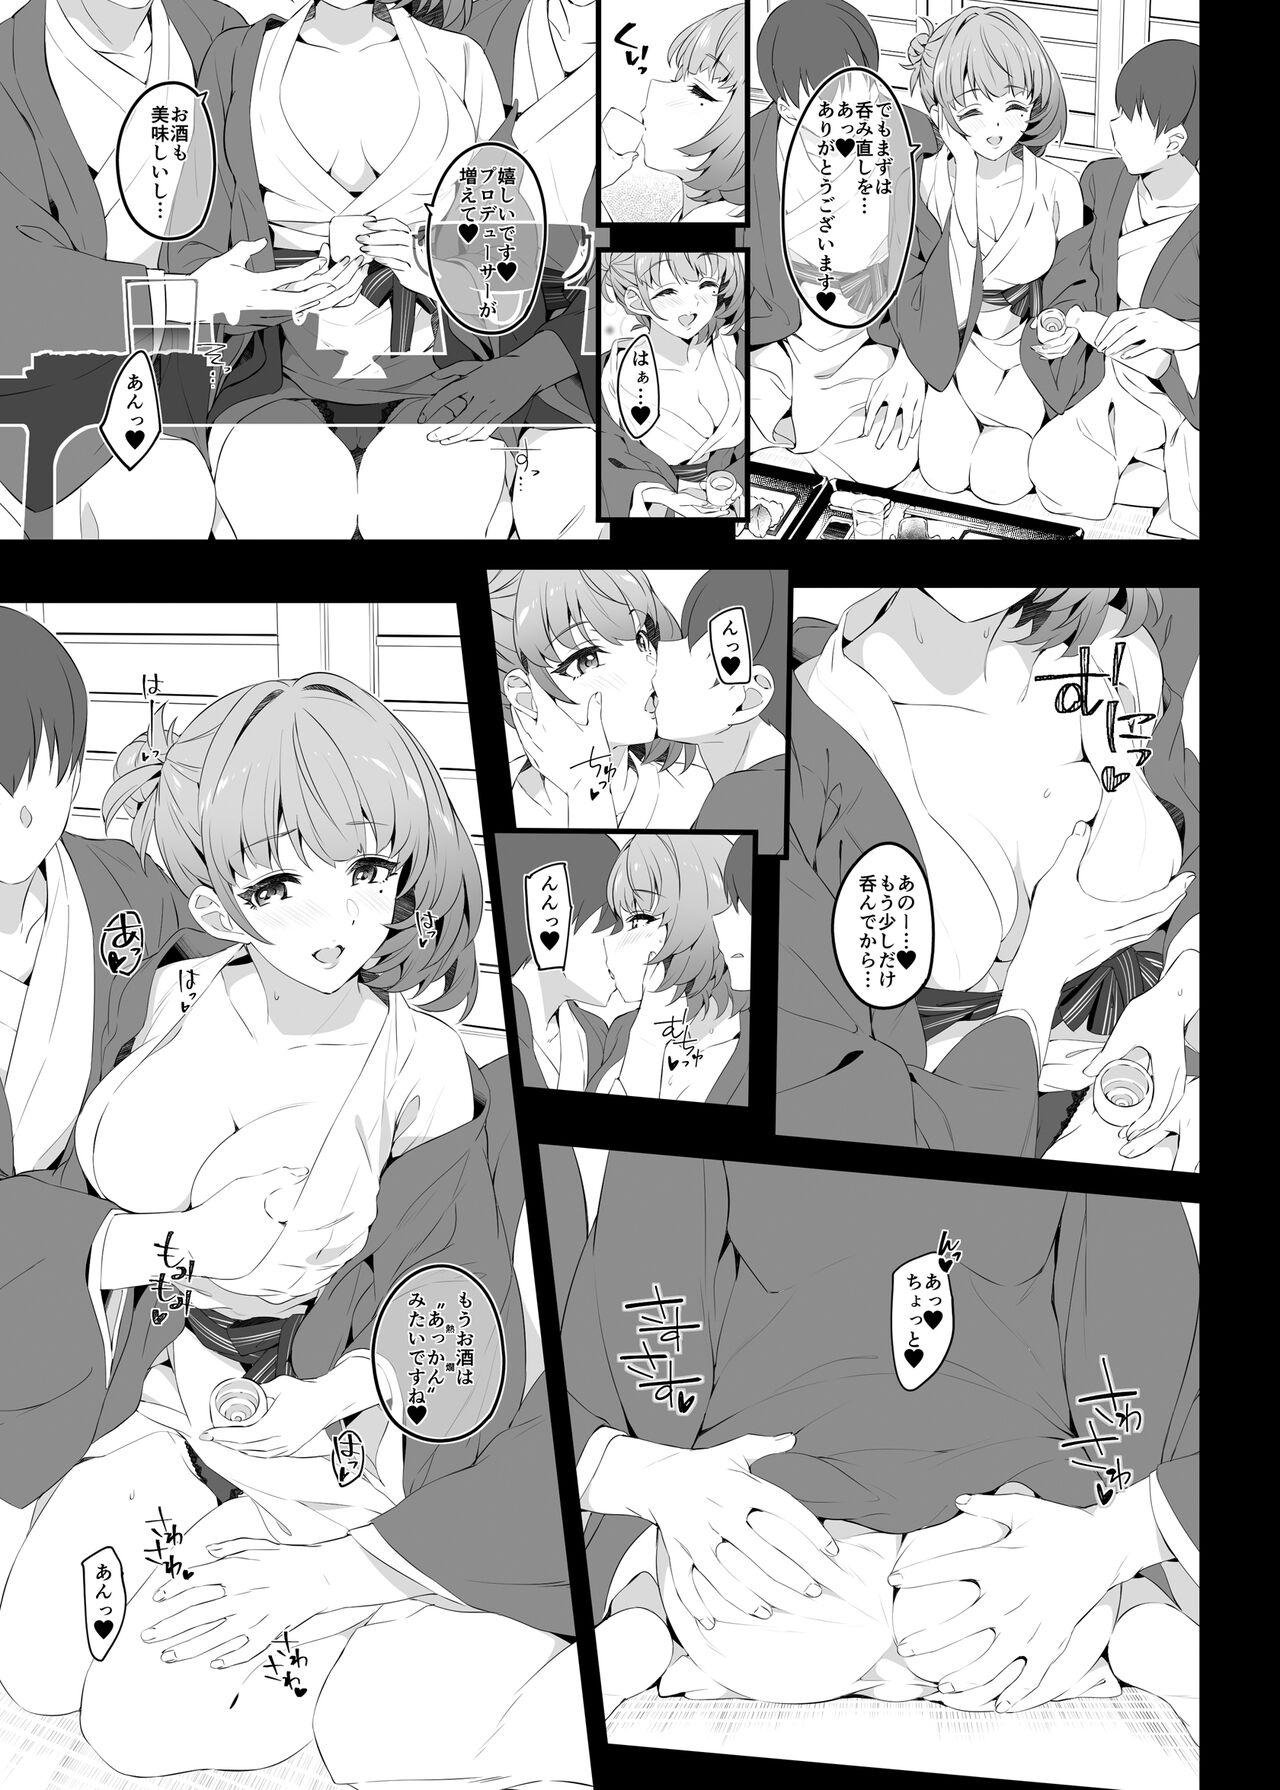 Doublepenetration Flowers blooming at night and the kings in the dream. - The idolmaster Coeds - Page 11